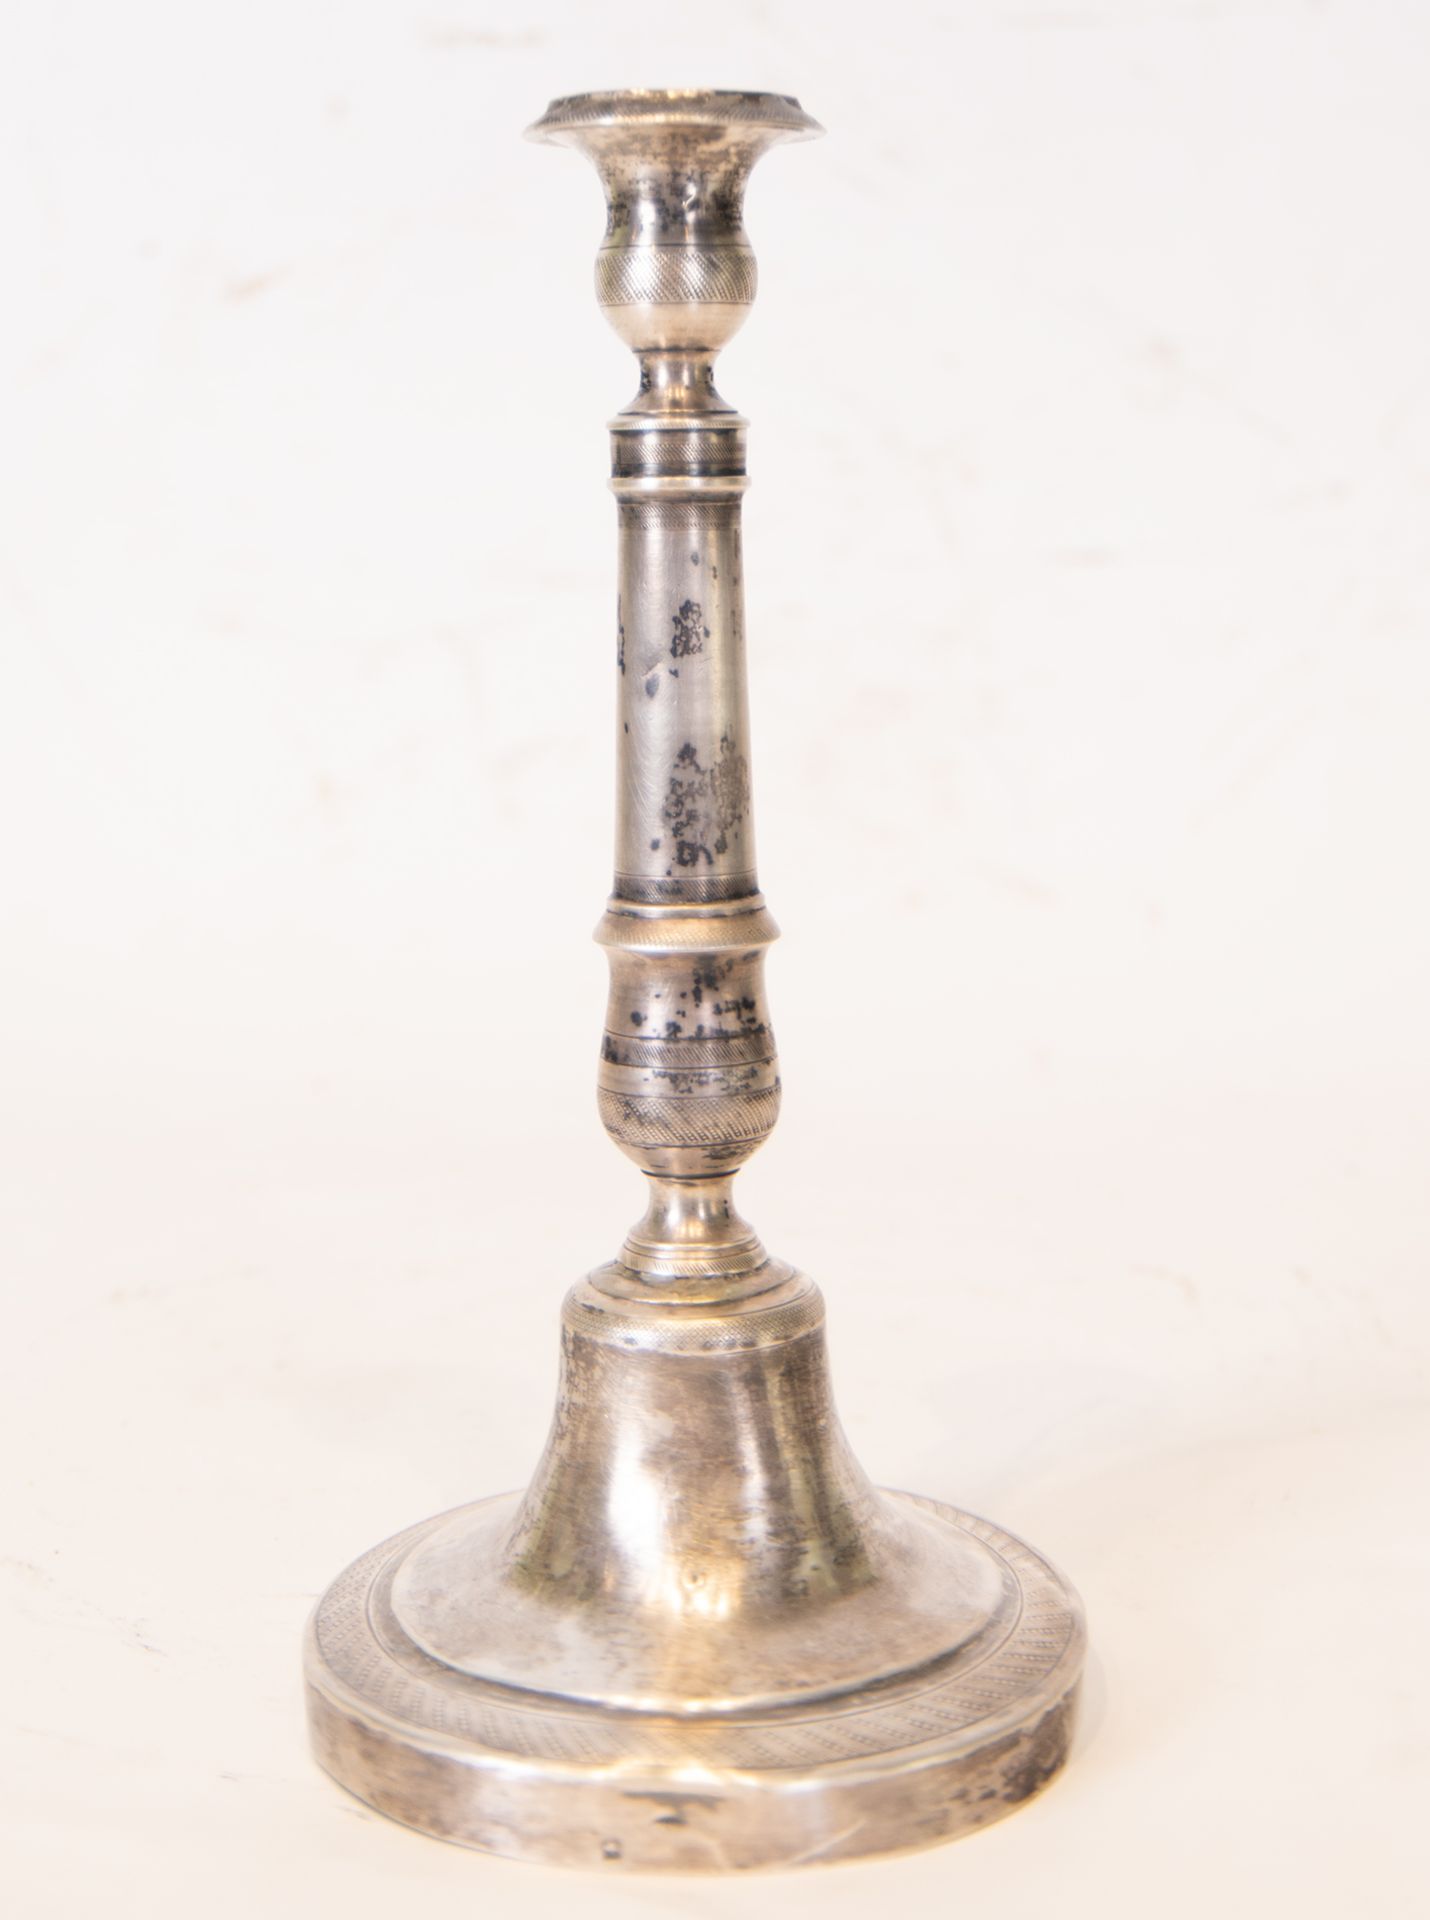 Pair of rare Fernandino candlesticks in solid silver, Spanish school of the 18th - 19th century - Image 6 of 8